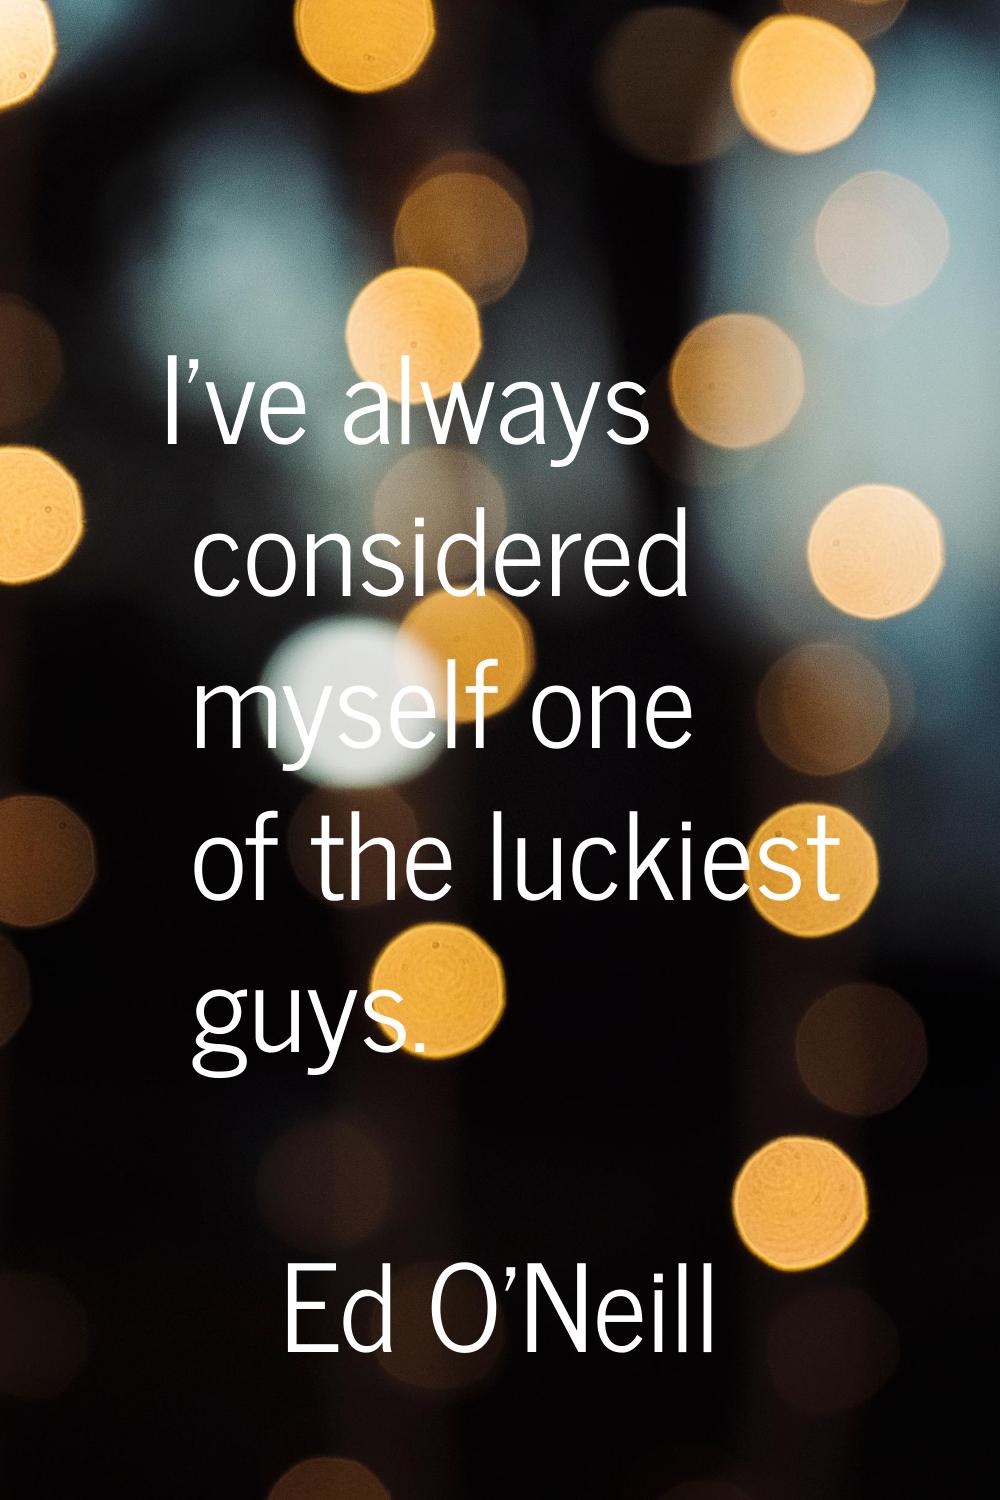 I've always considered myself one of the luckiest guys.